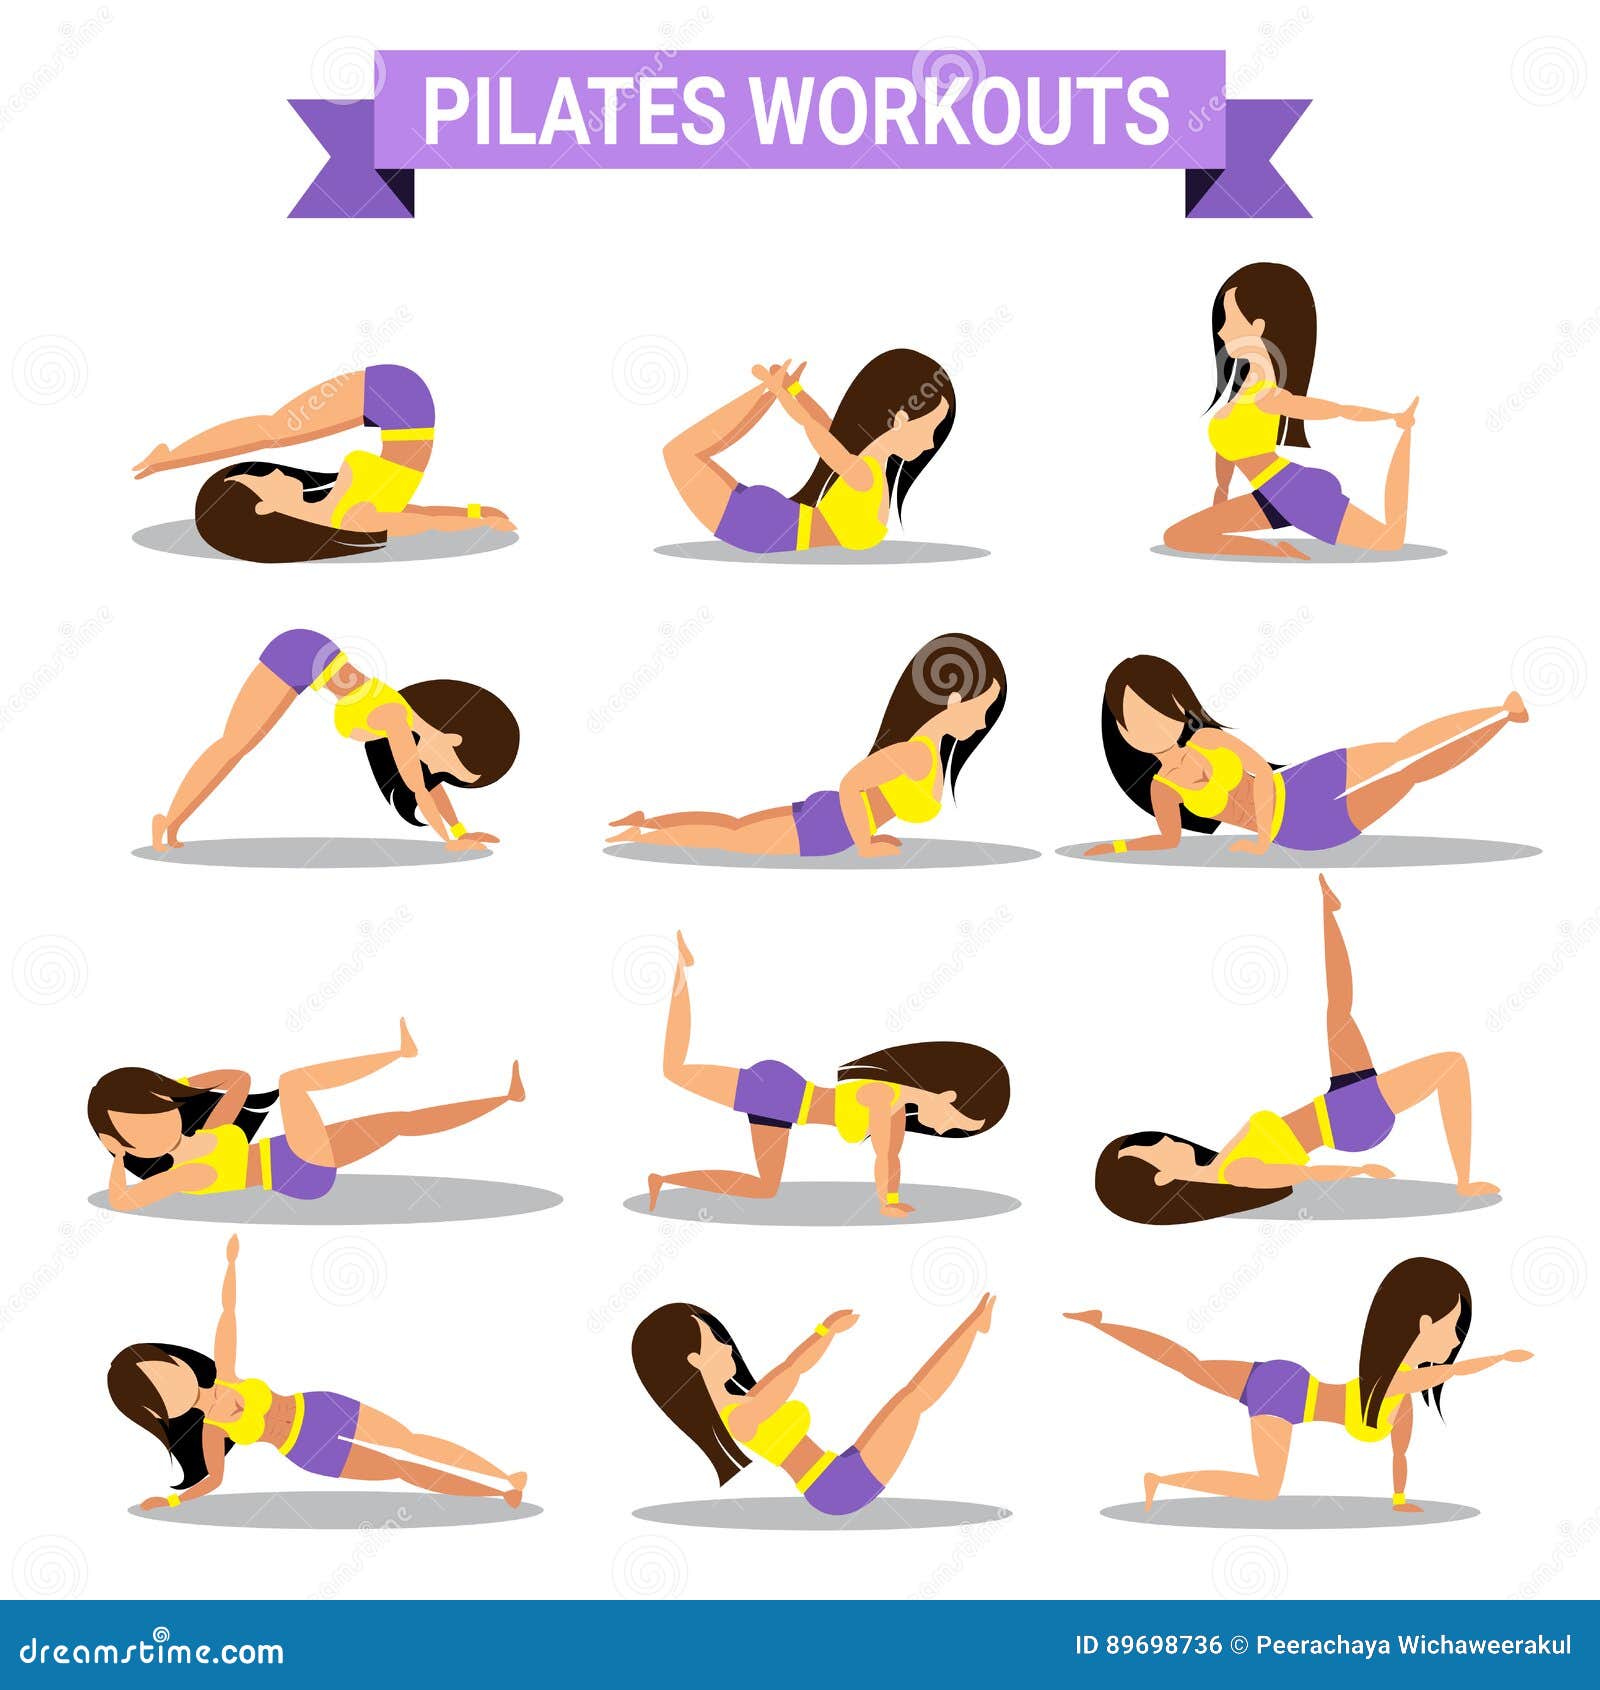 https://thumbs.dreamstime.com/z/set-pilates-workouts-design-isolated-white-background-89698736.jpg